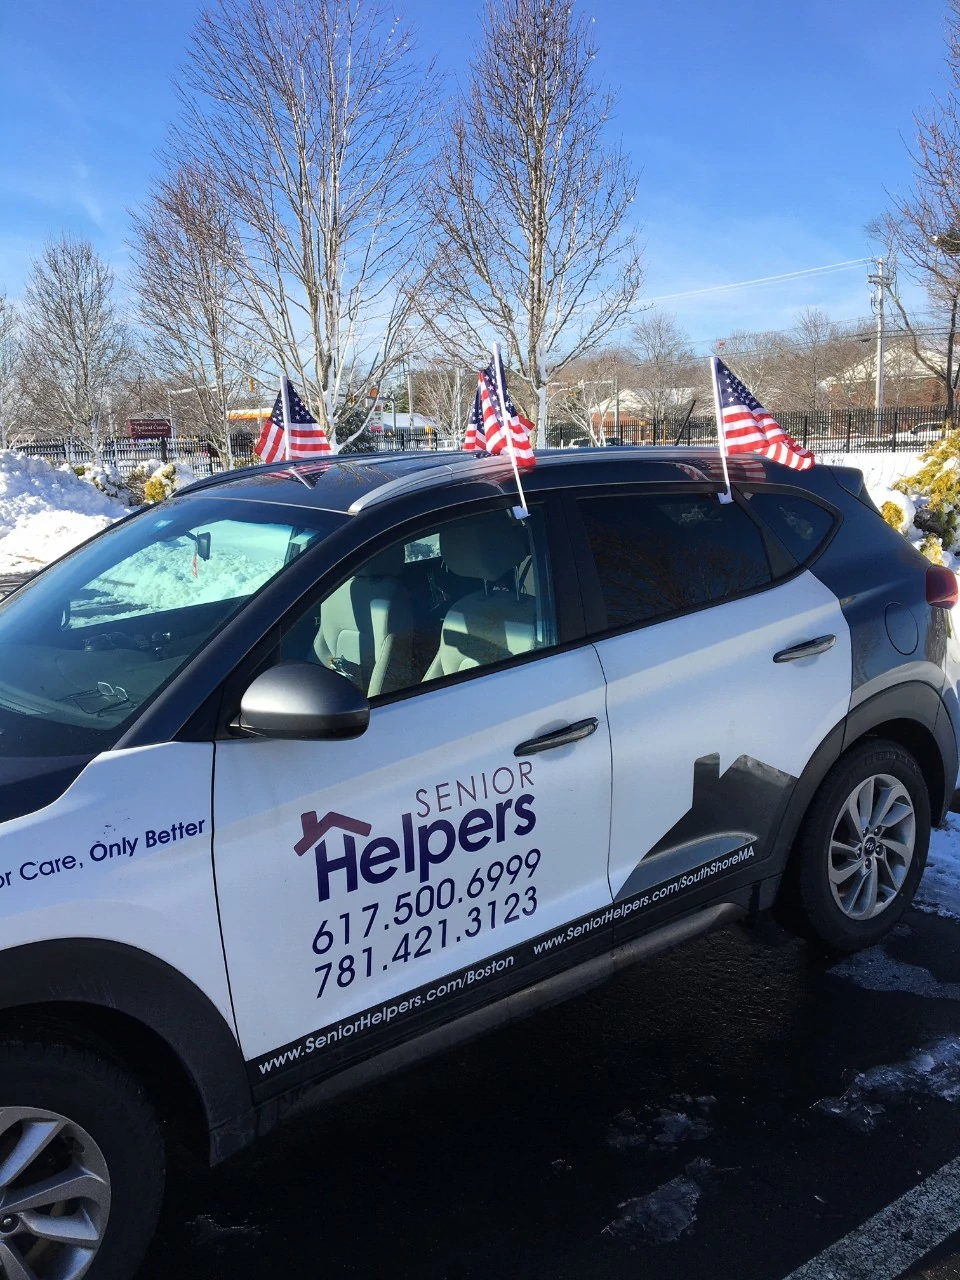 One of our cars with flags to honor the veterans